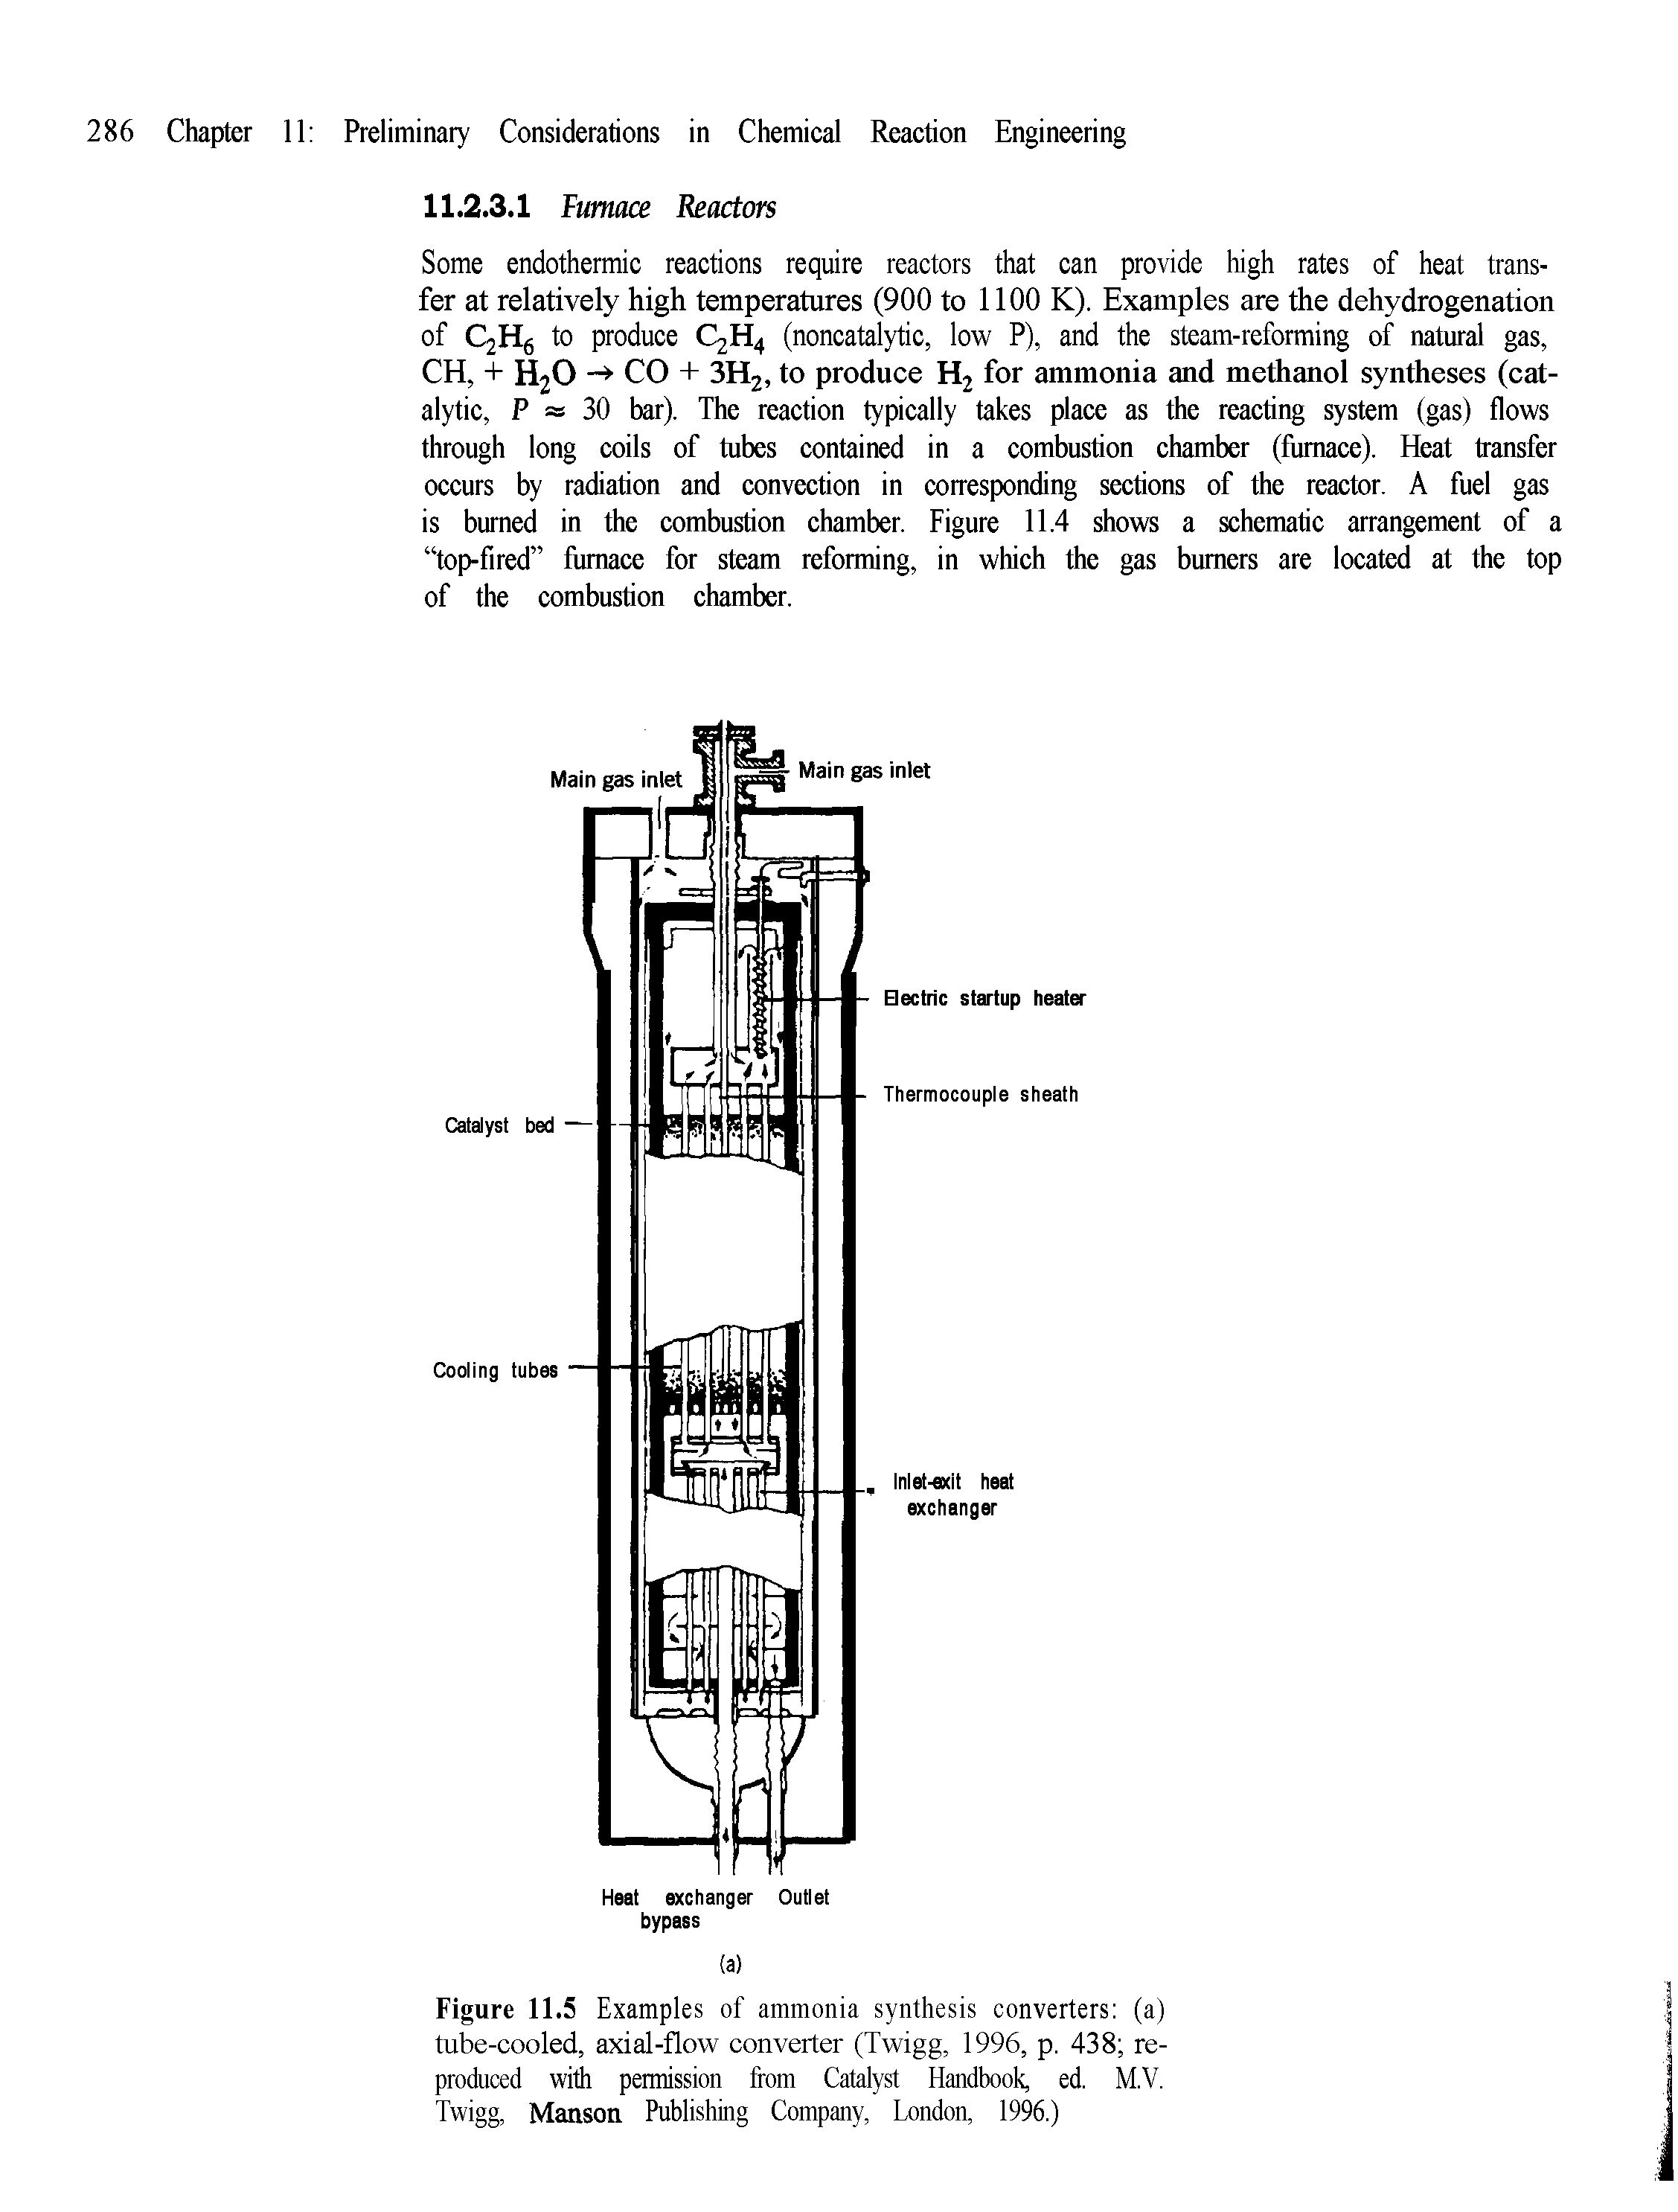 Figure 11.5 Examples of ammonia synthesis converters (a) tube-cooled, axial-flow converter (Twigg, 1996, p. 438 reproduced with permission from Catalyst Handbook, ed. M.V. Twigg, Manson Publishing Company, London, 1996.)...